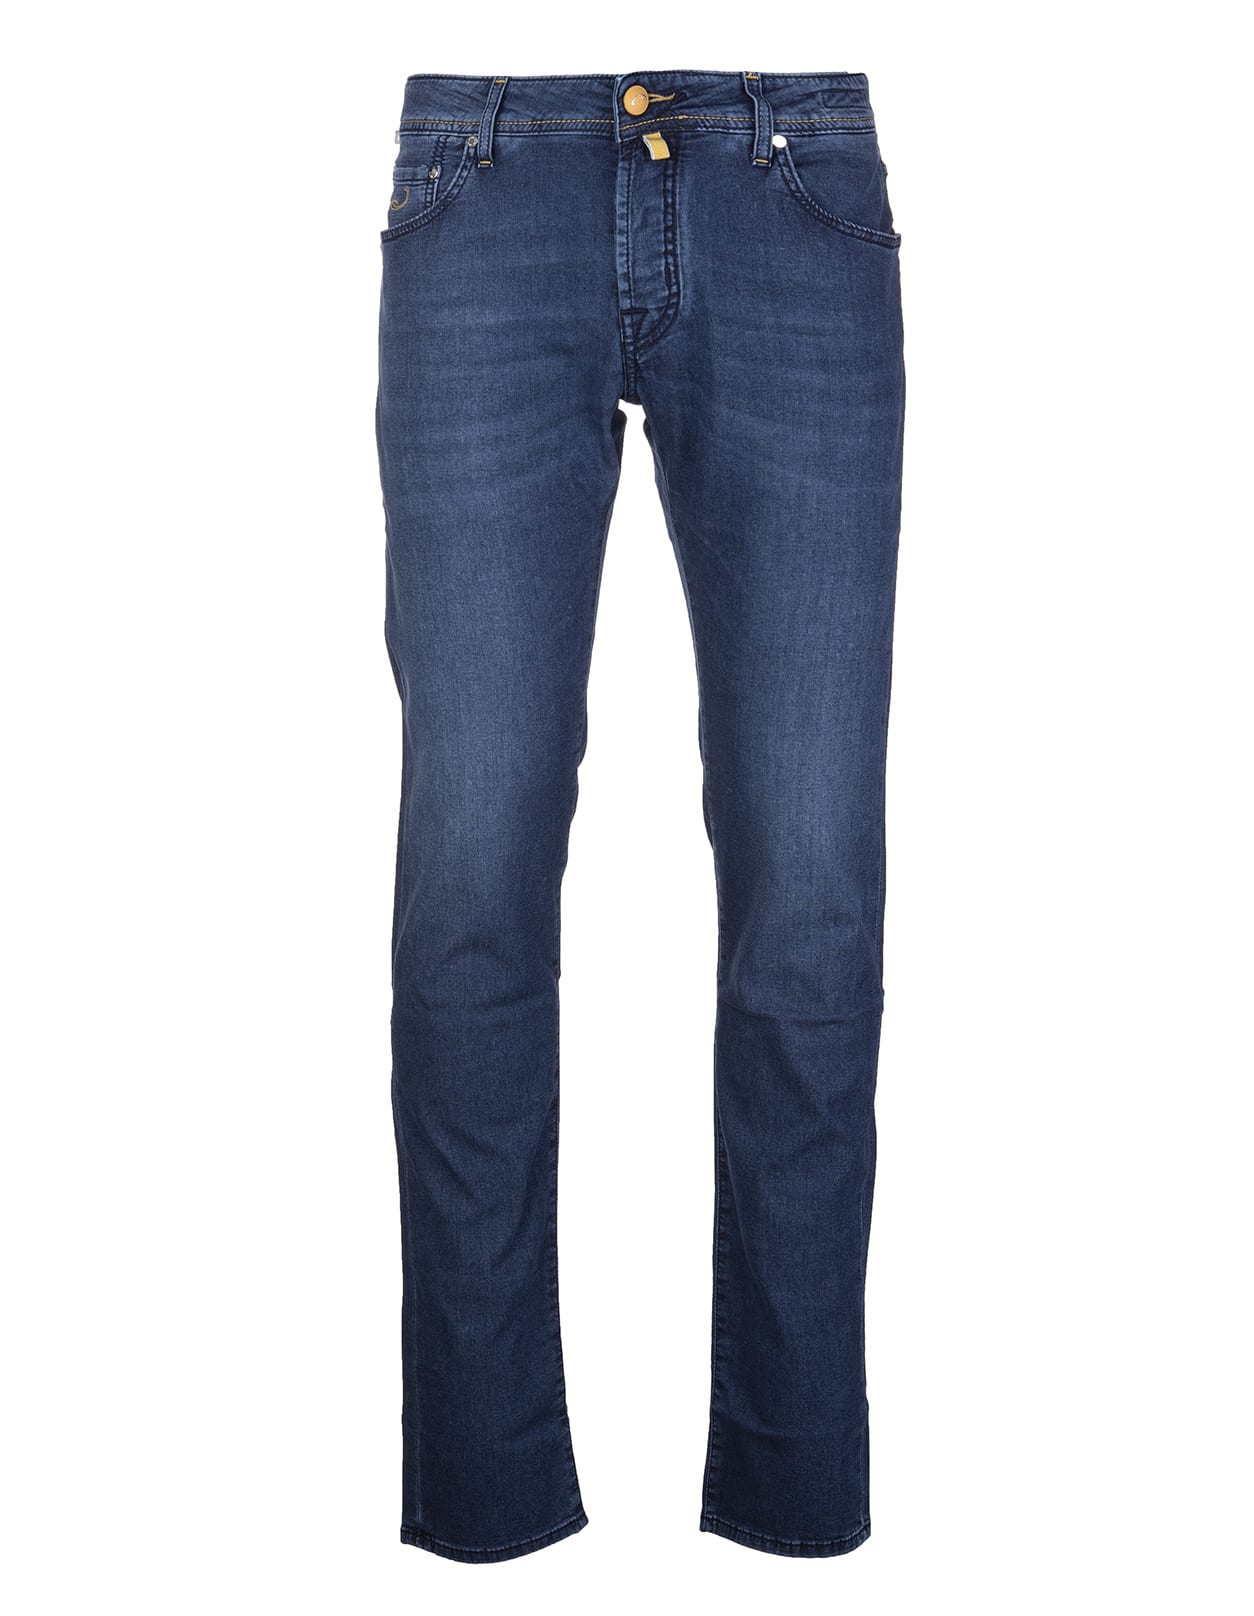 Jacob Cohen Man Night Blue Slim Fit Jeans With Contrast Stitching